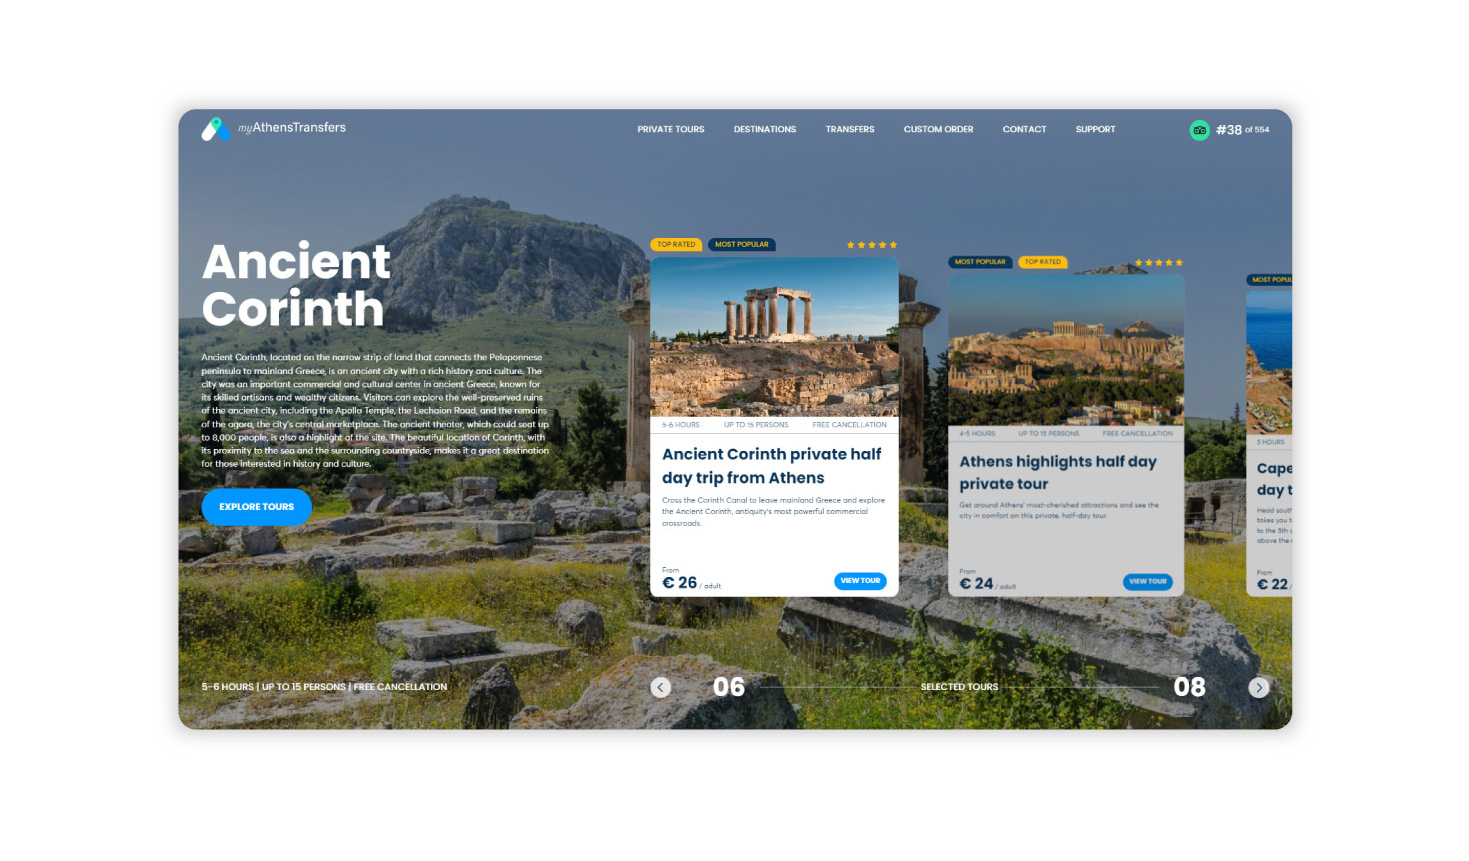 Selected tours: Ancient Corinth WEB DESIGN AND DEVELOPMENT